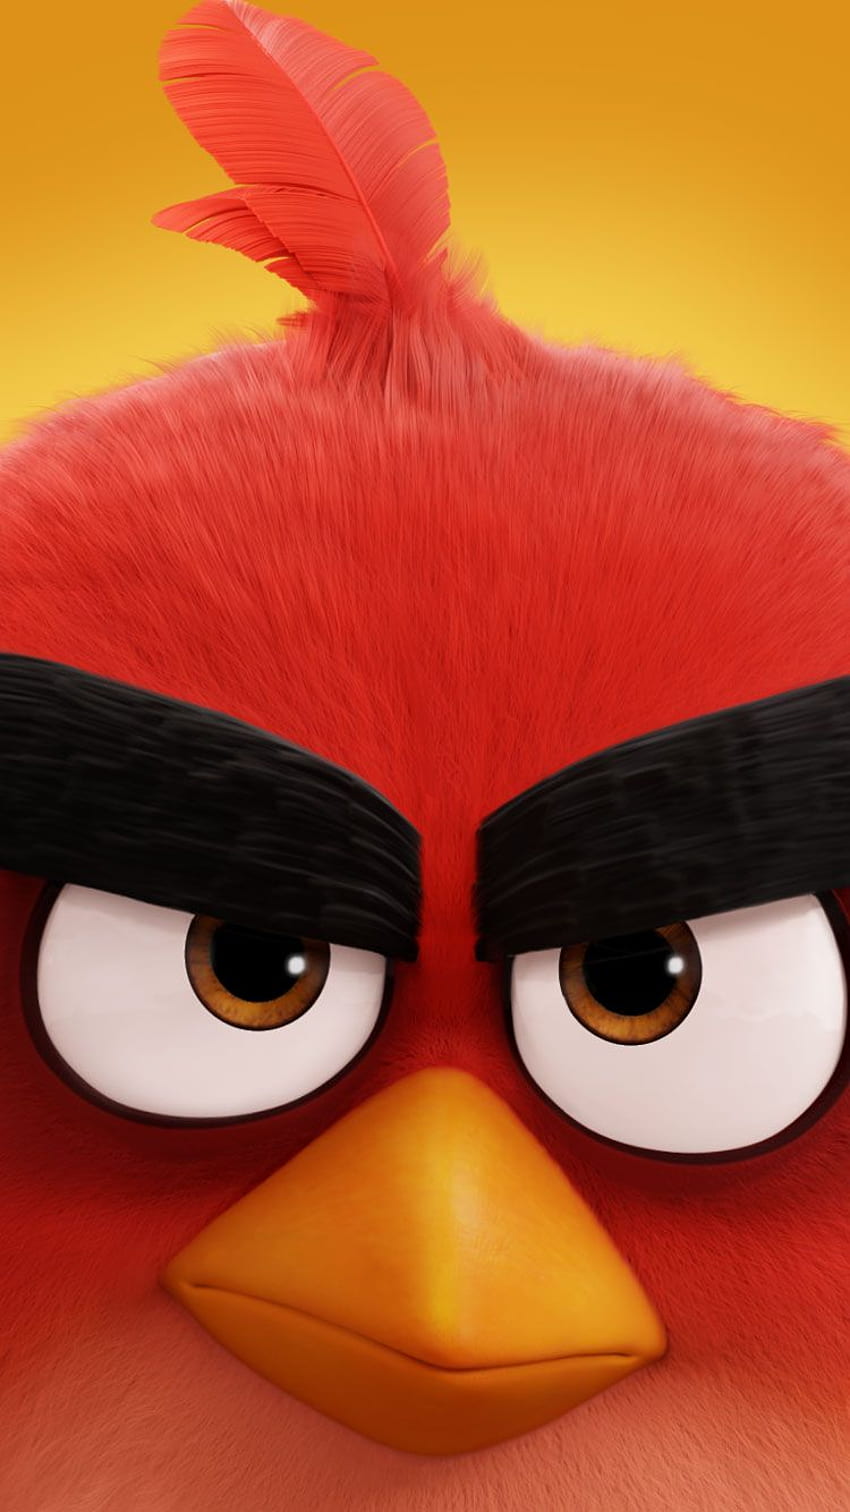 21+] Angry Birds Movie Red Wallpapers - WallpaperSafari